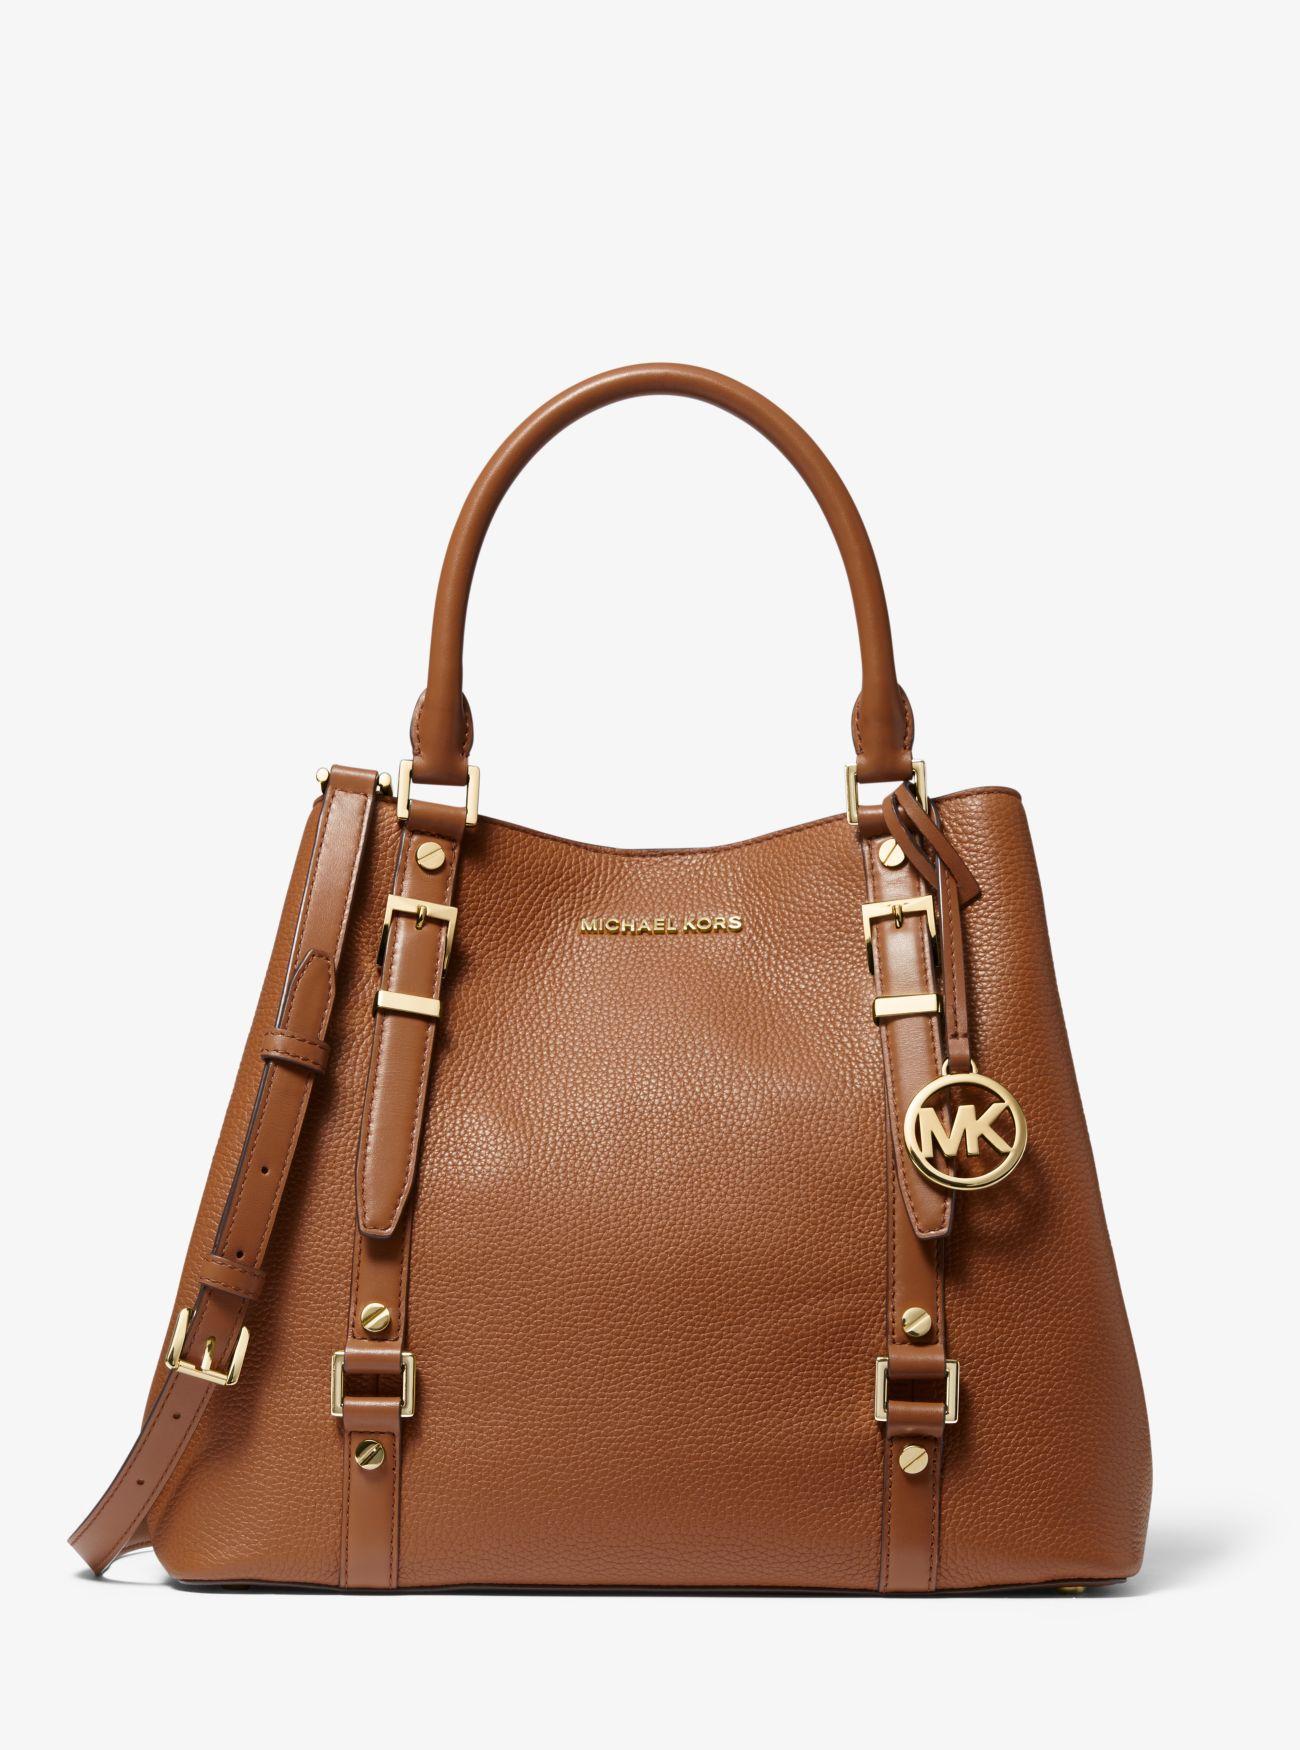 MICHAEL Michael Kors Bedford Legacy Large Pebbled Leather Tote Bag in Brown - Lyst